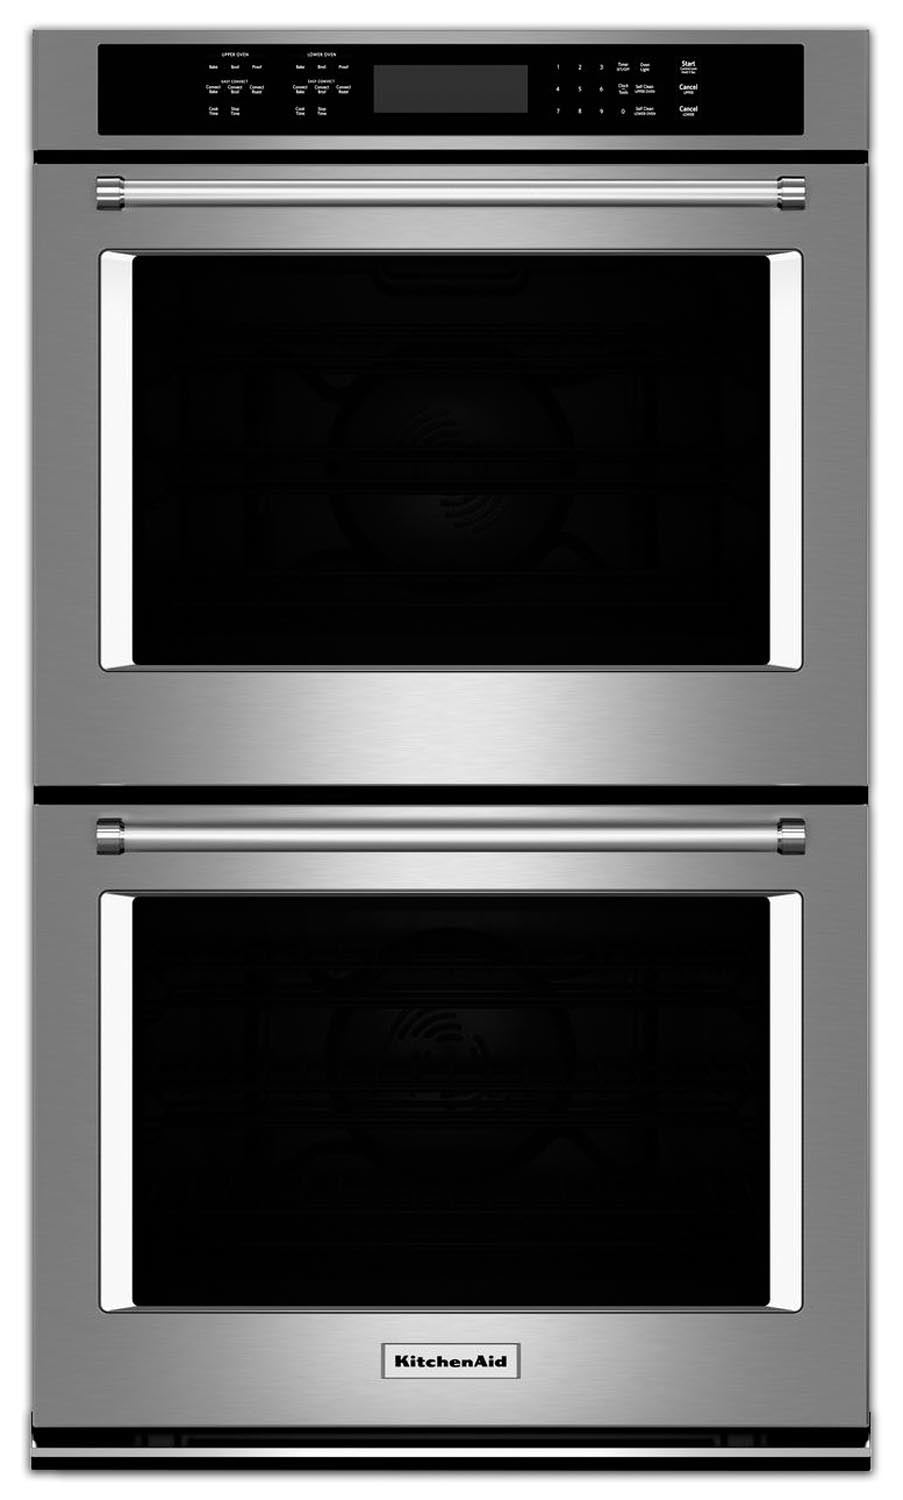 KitchenAid Stainless Steel Convection Double Wall Oven (8.6 Cu. Ft.) - KODE507ESS